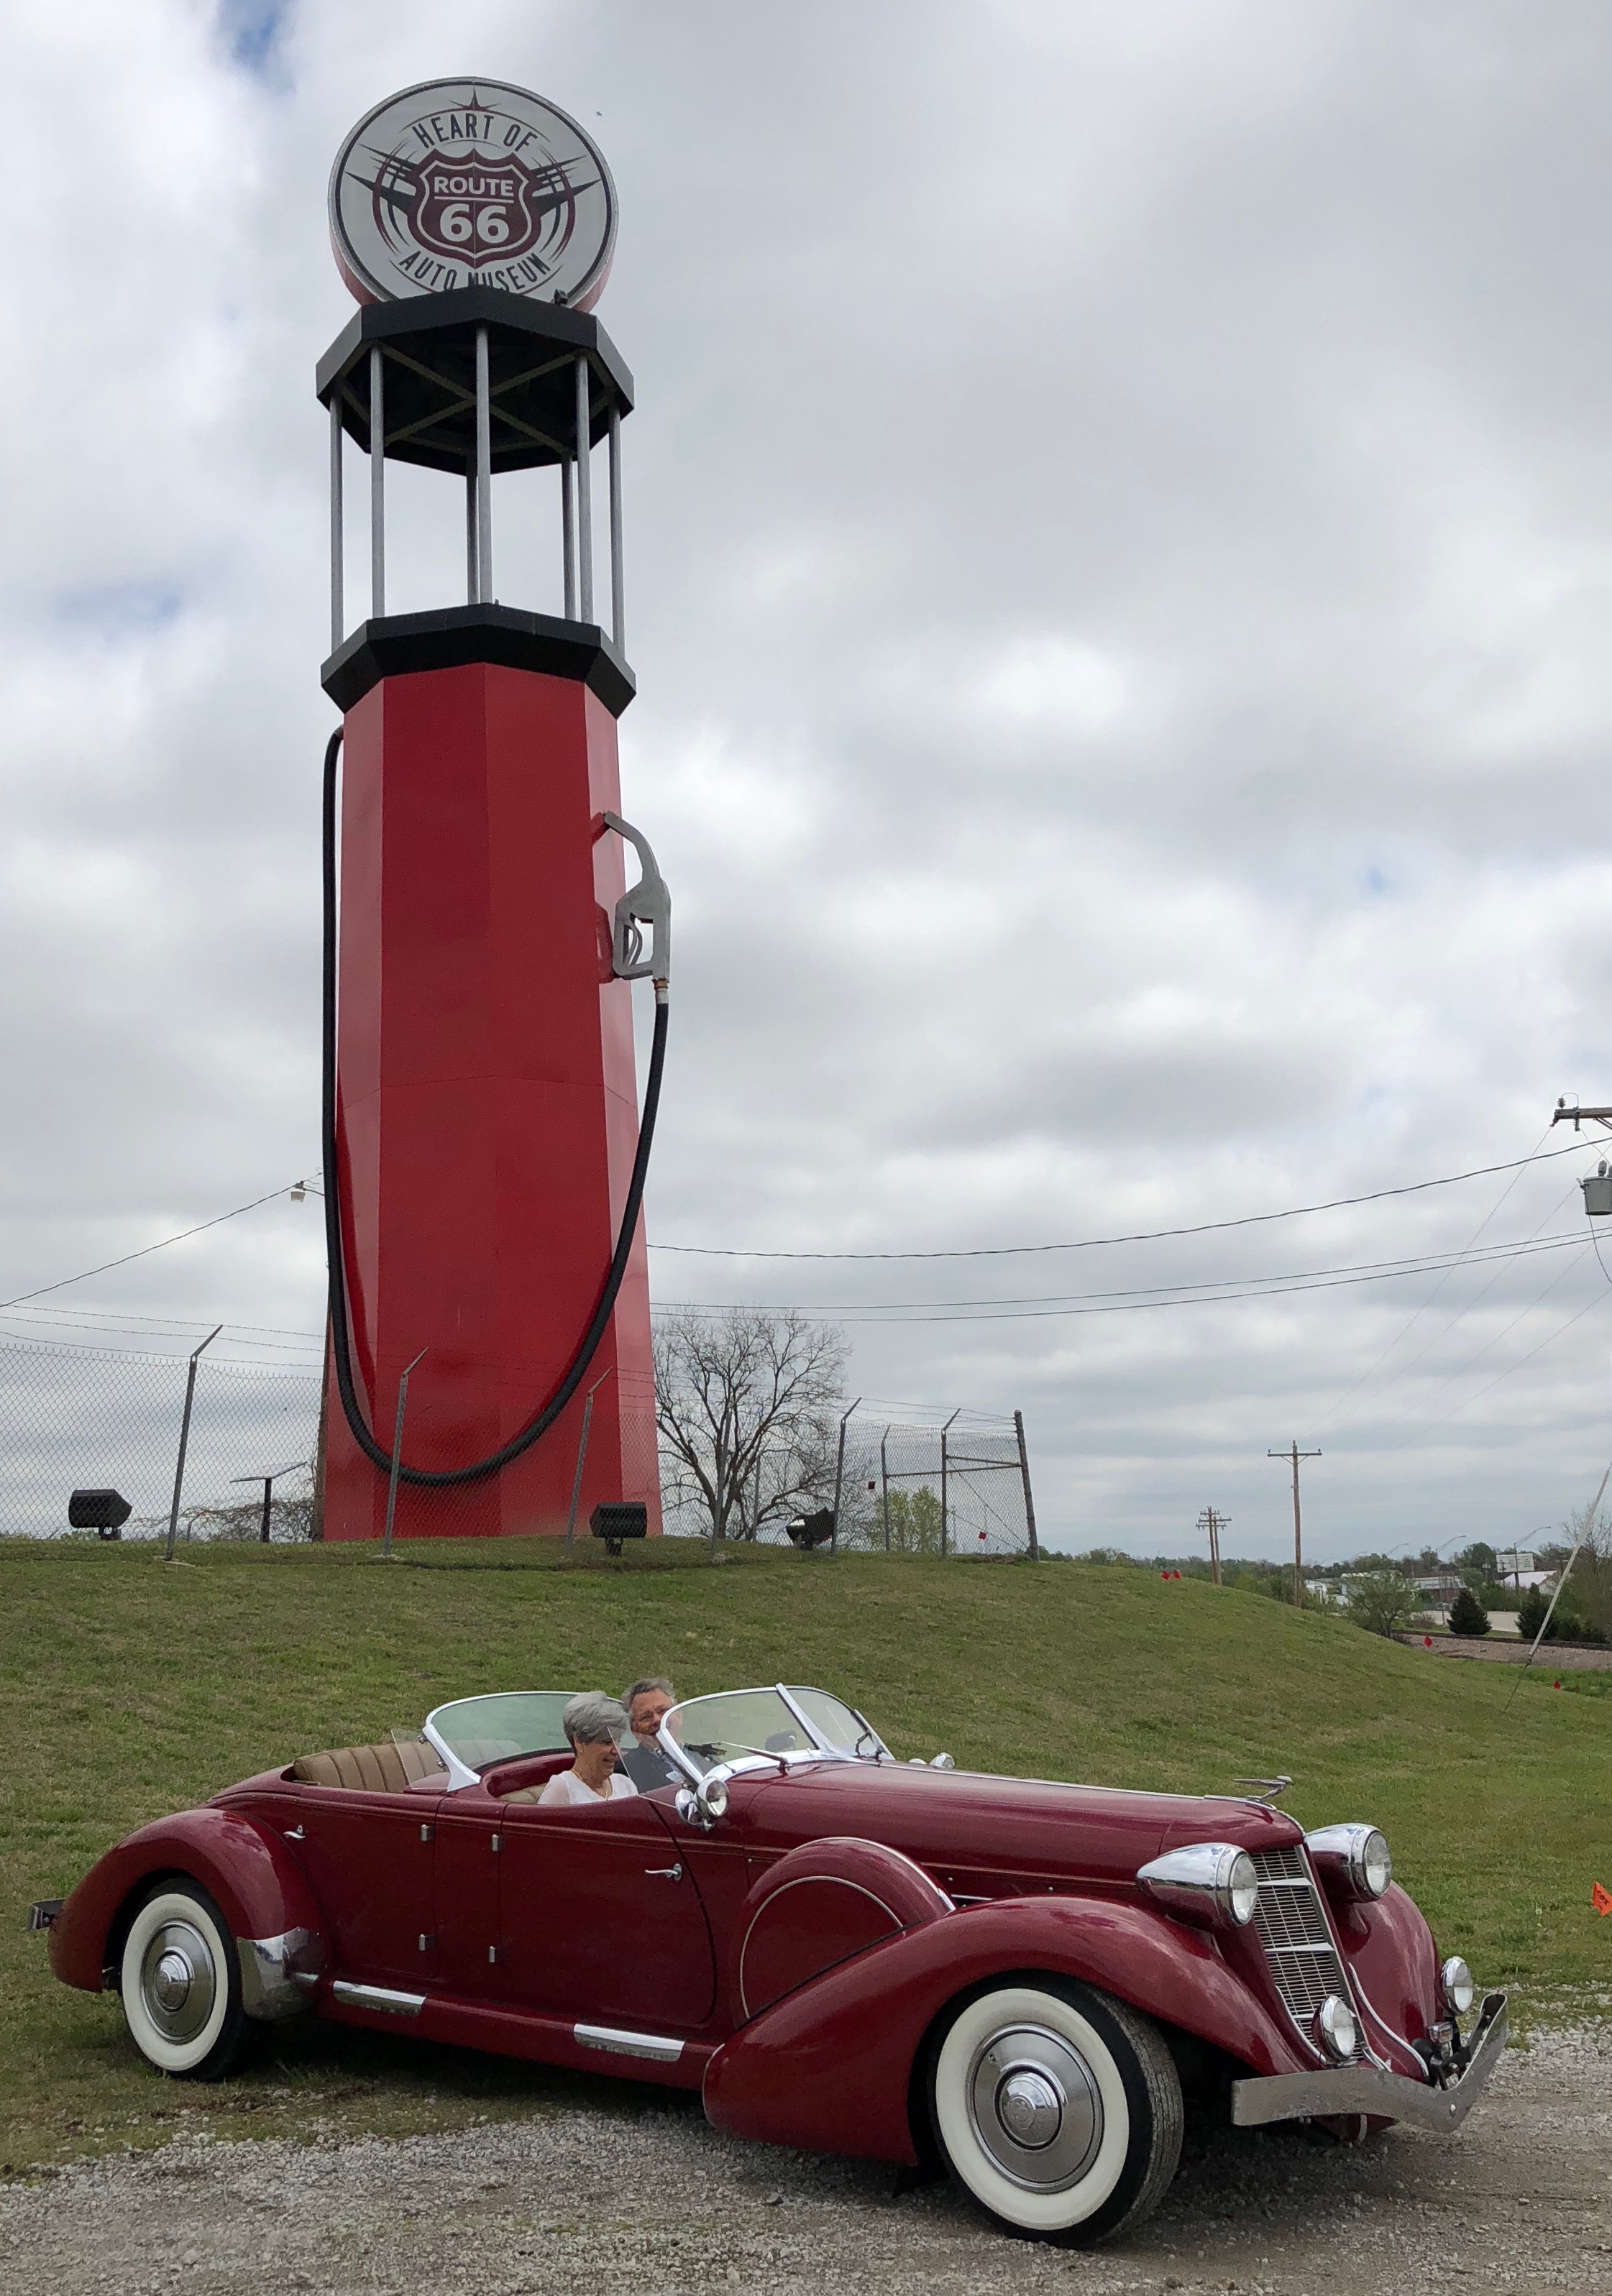 LeMay, BMWs at LeMay, world’s tallest gas pump in Oklahoma, and other museum news, ClassicCars.com Journal